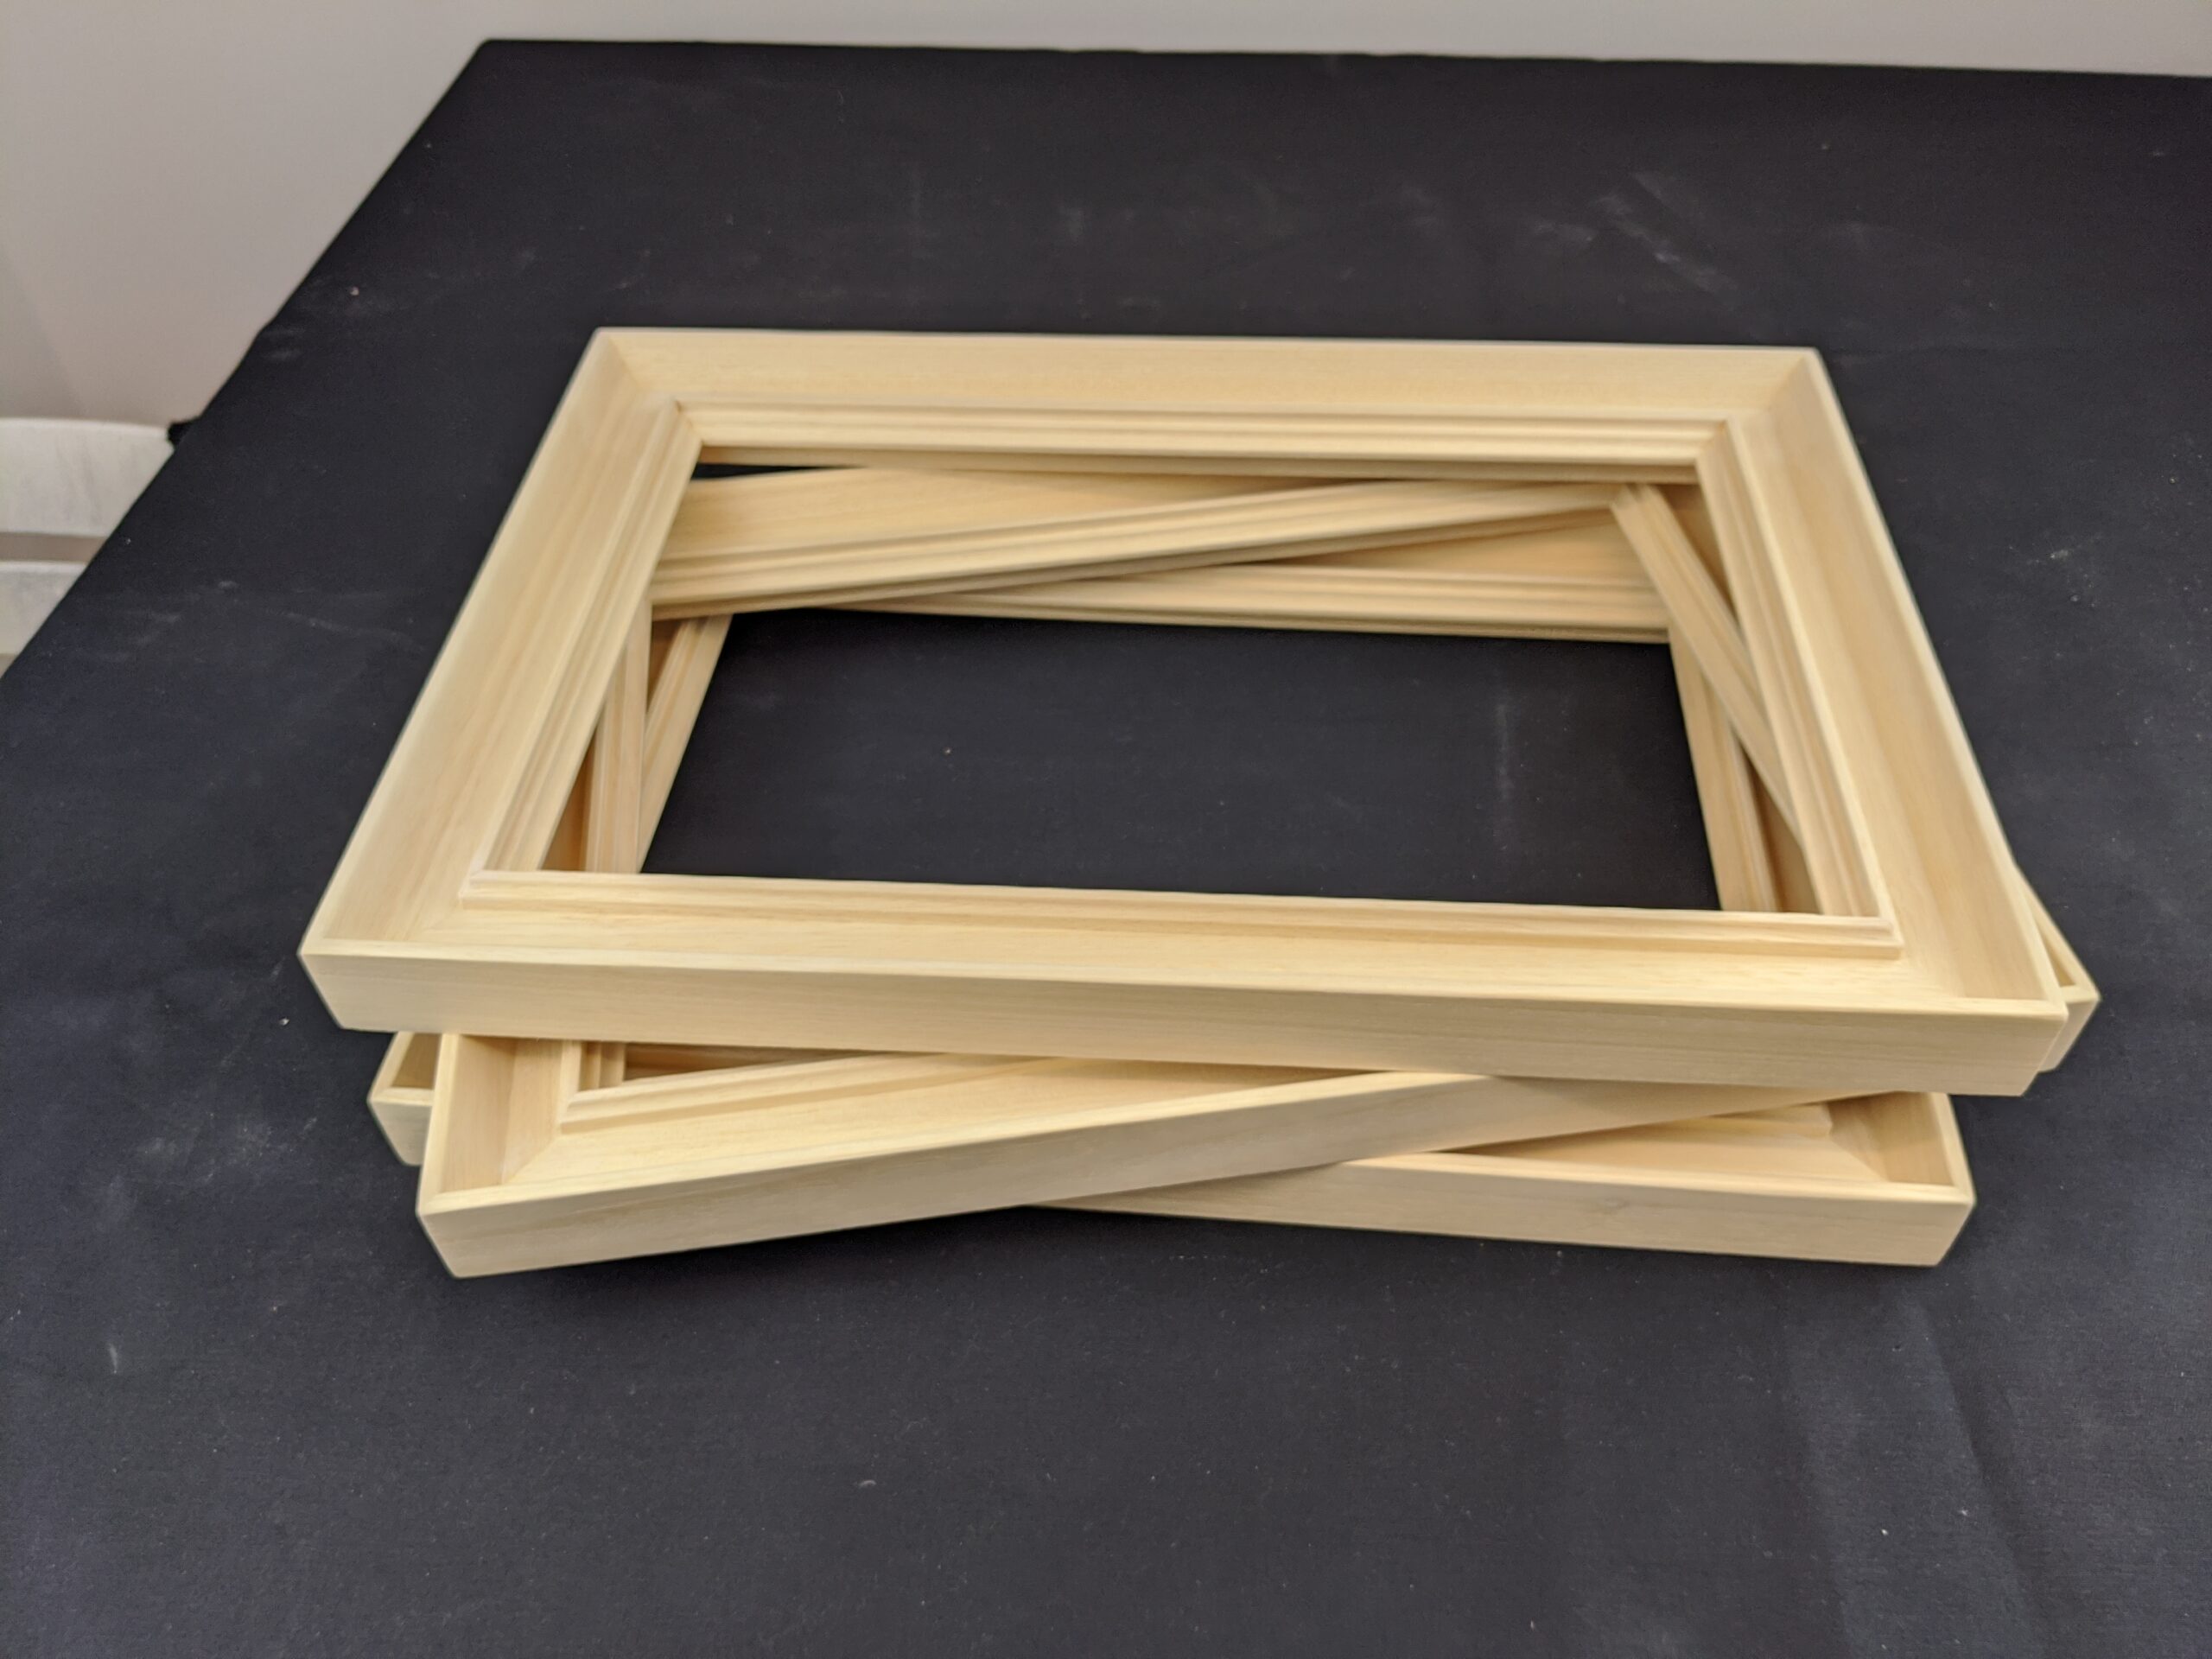 Prepared and Sanded Wild Frames – 36O, Small Golden